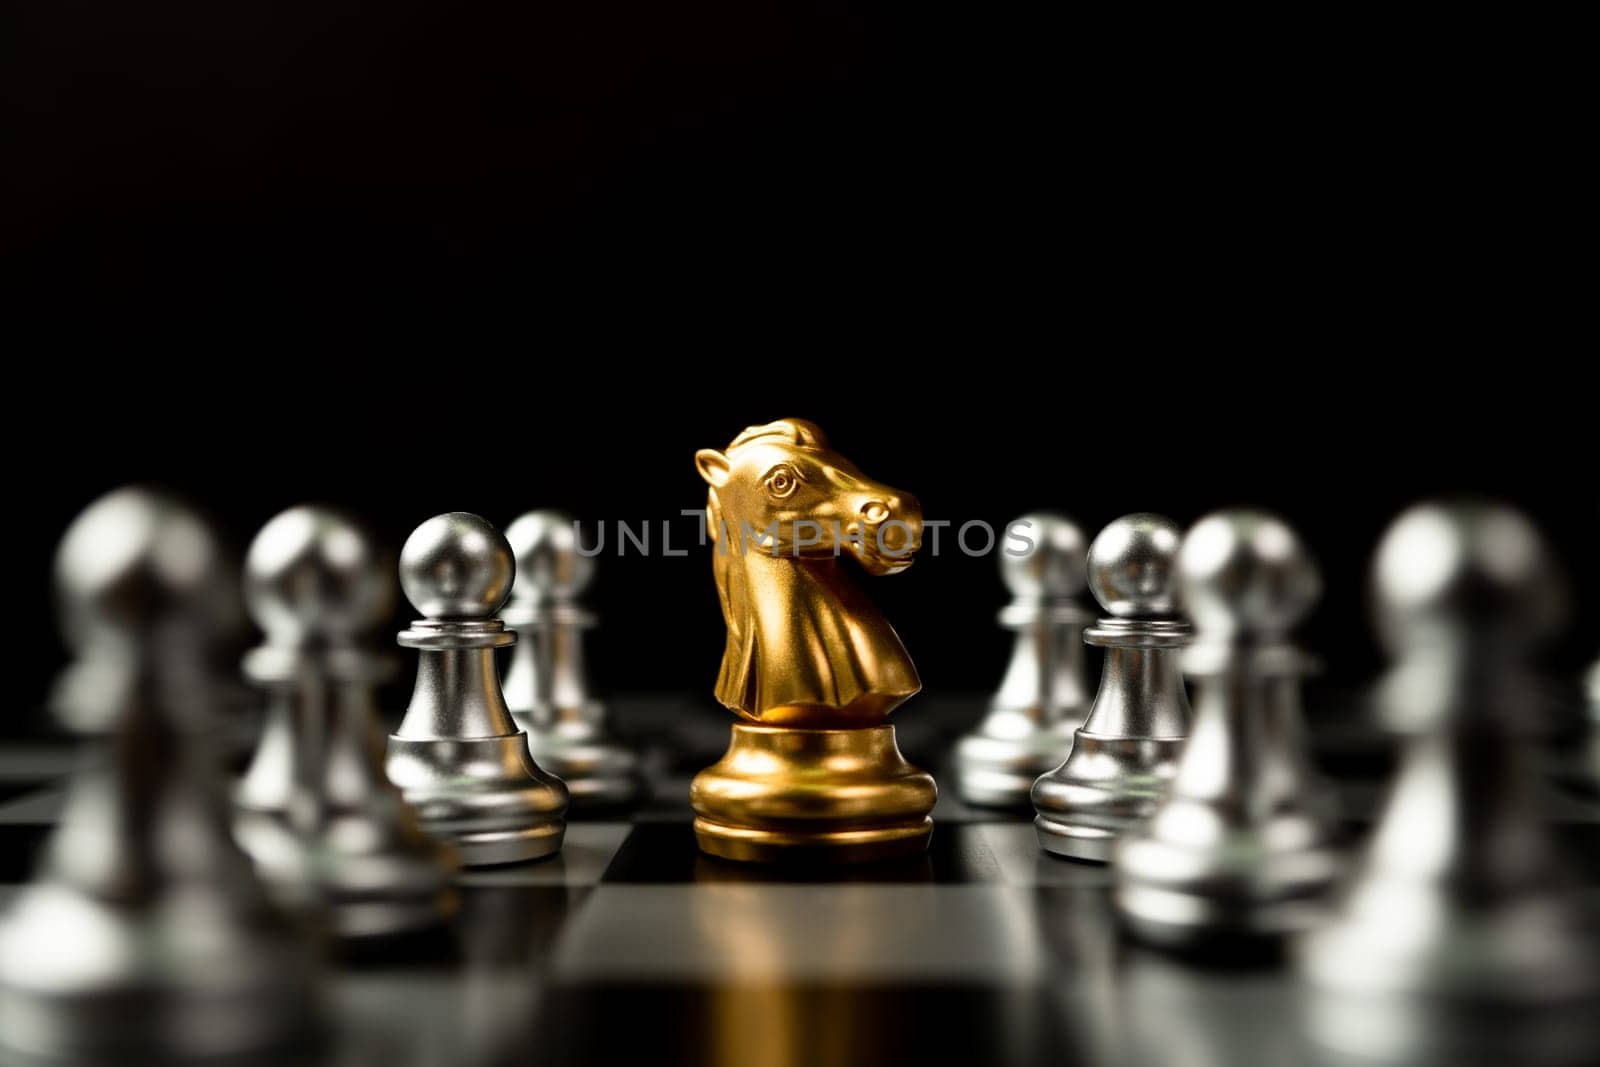 Golden Chess horse standing to Be around of other chess, Concept of a leader must have courage and challenge in the competition, leadership and business vision for a win in business games by PattyPhoto